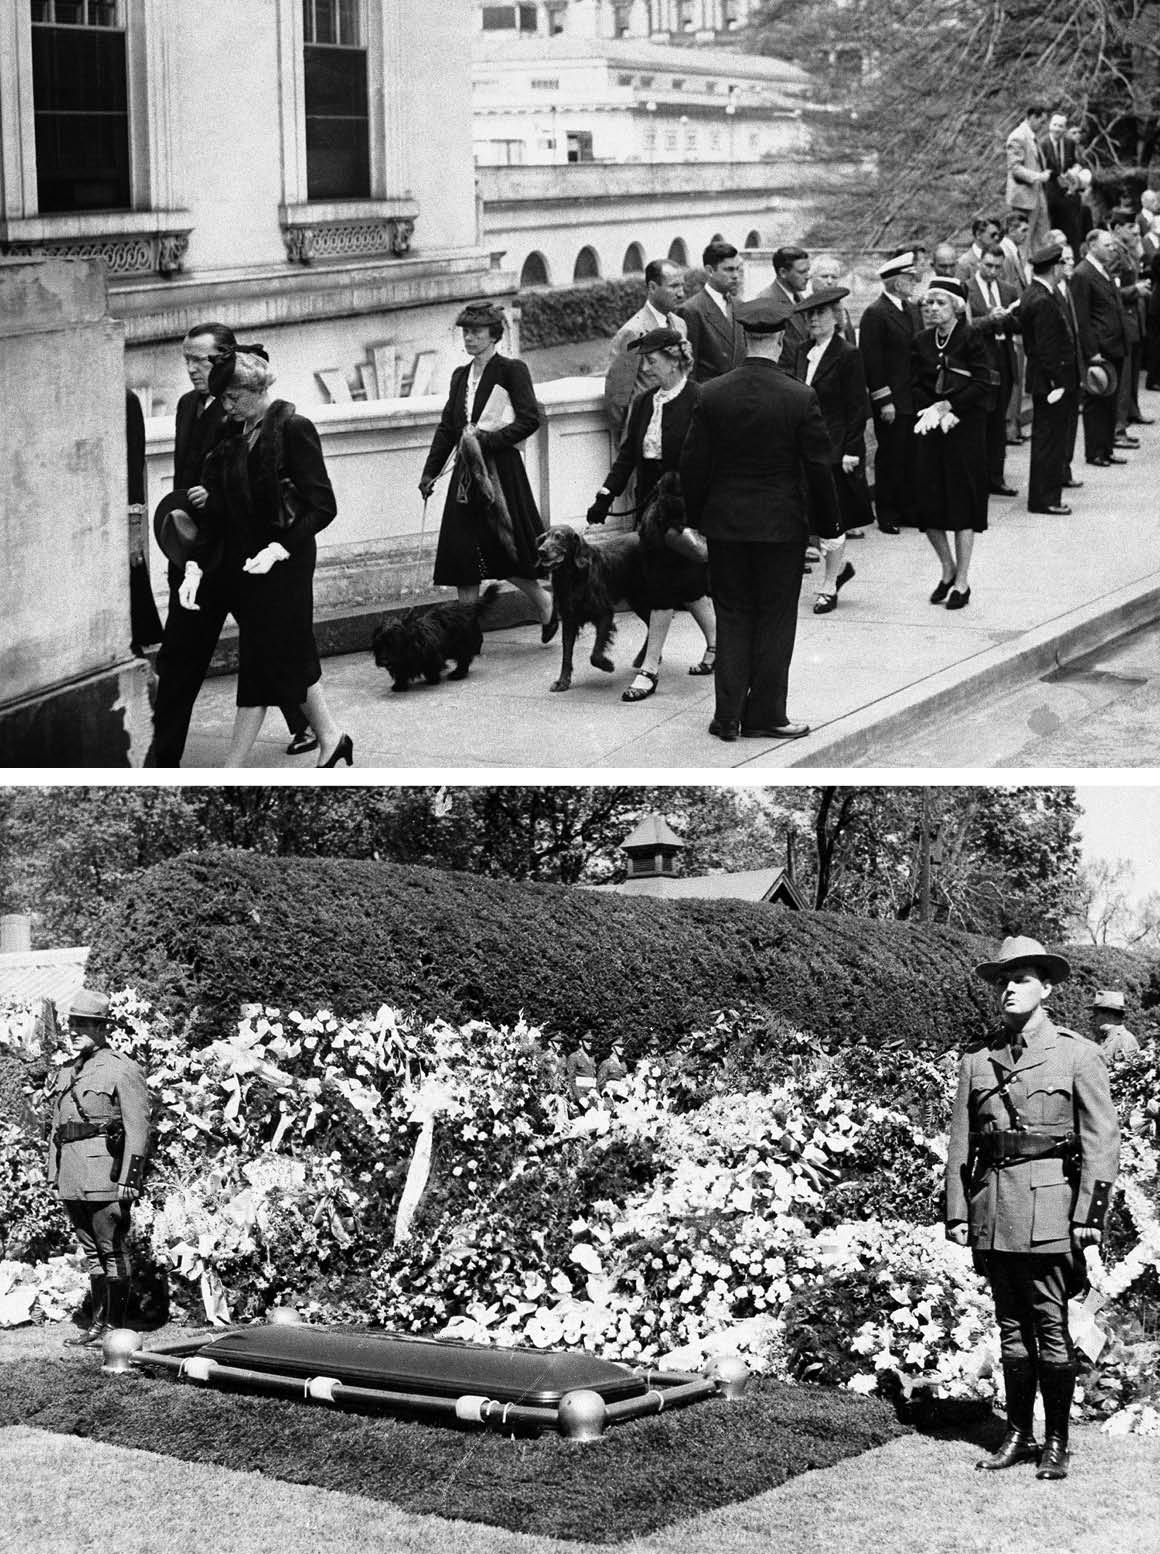 Top: Scottie pet of the late President Franklin D Roosevelt, arrives at the White House in Washington, April 14, 1945 for the funeral of his master. He is led by Margaret Suckley, cousin of the late president. In the procession left to right are: Basil O'Connor, law partner of Mrs. Roosevelt; Grace Tully, secretary to Mr. Roosevelt; Miss Suckley; Laura Delano, cousin of Mr. Roosevelt, leading Anna Roosevelt Boettiger. Bottom: New York State Police guard the grave of President Franklin D. Roosevelt on his estate at Hyde Park, N.Y., April 15, 1945, following his funeral. 